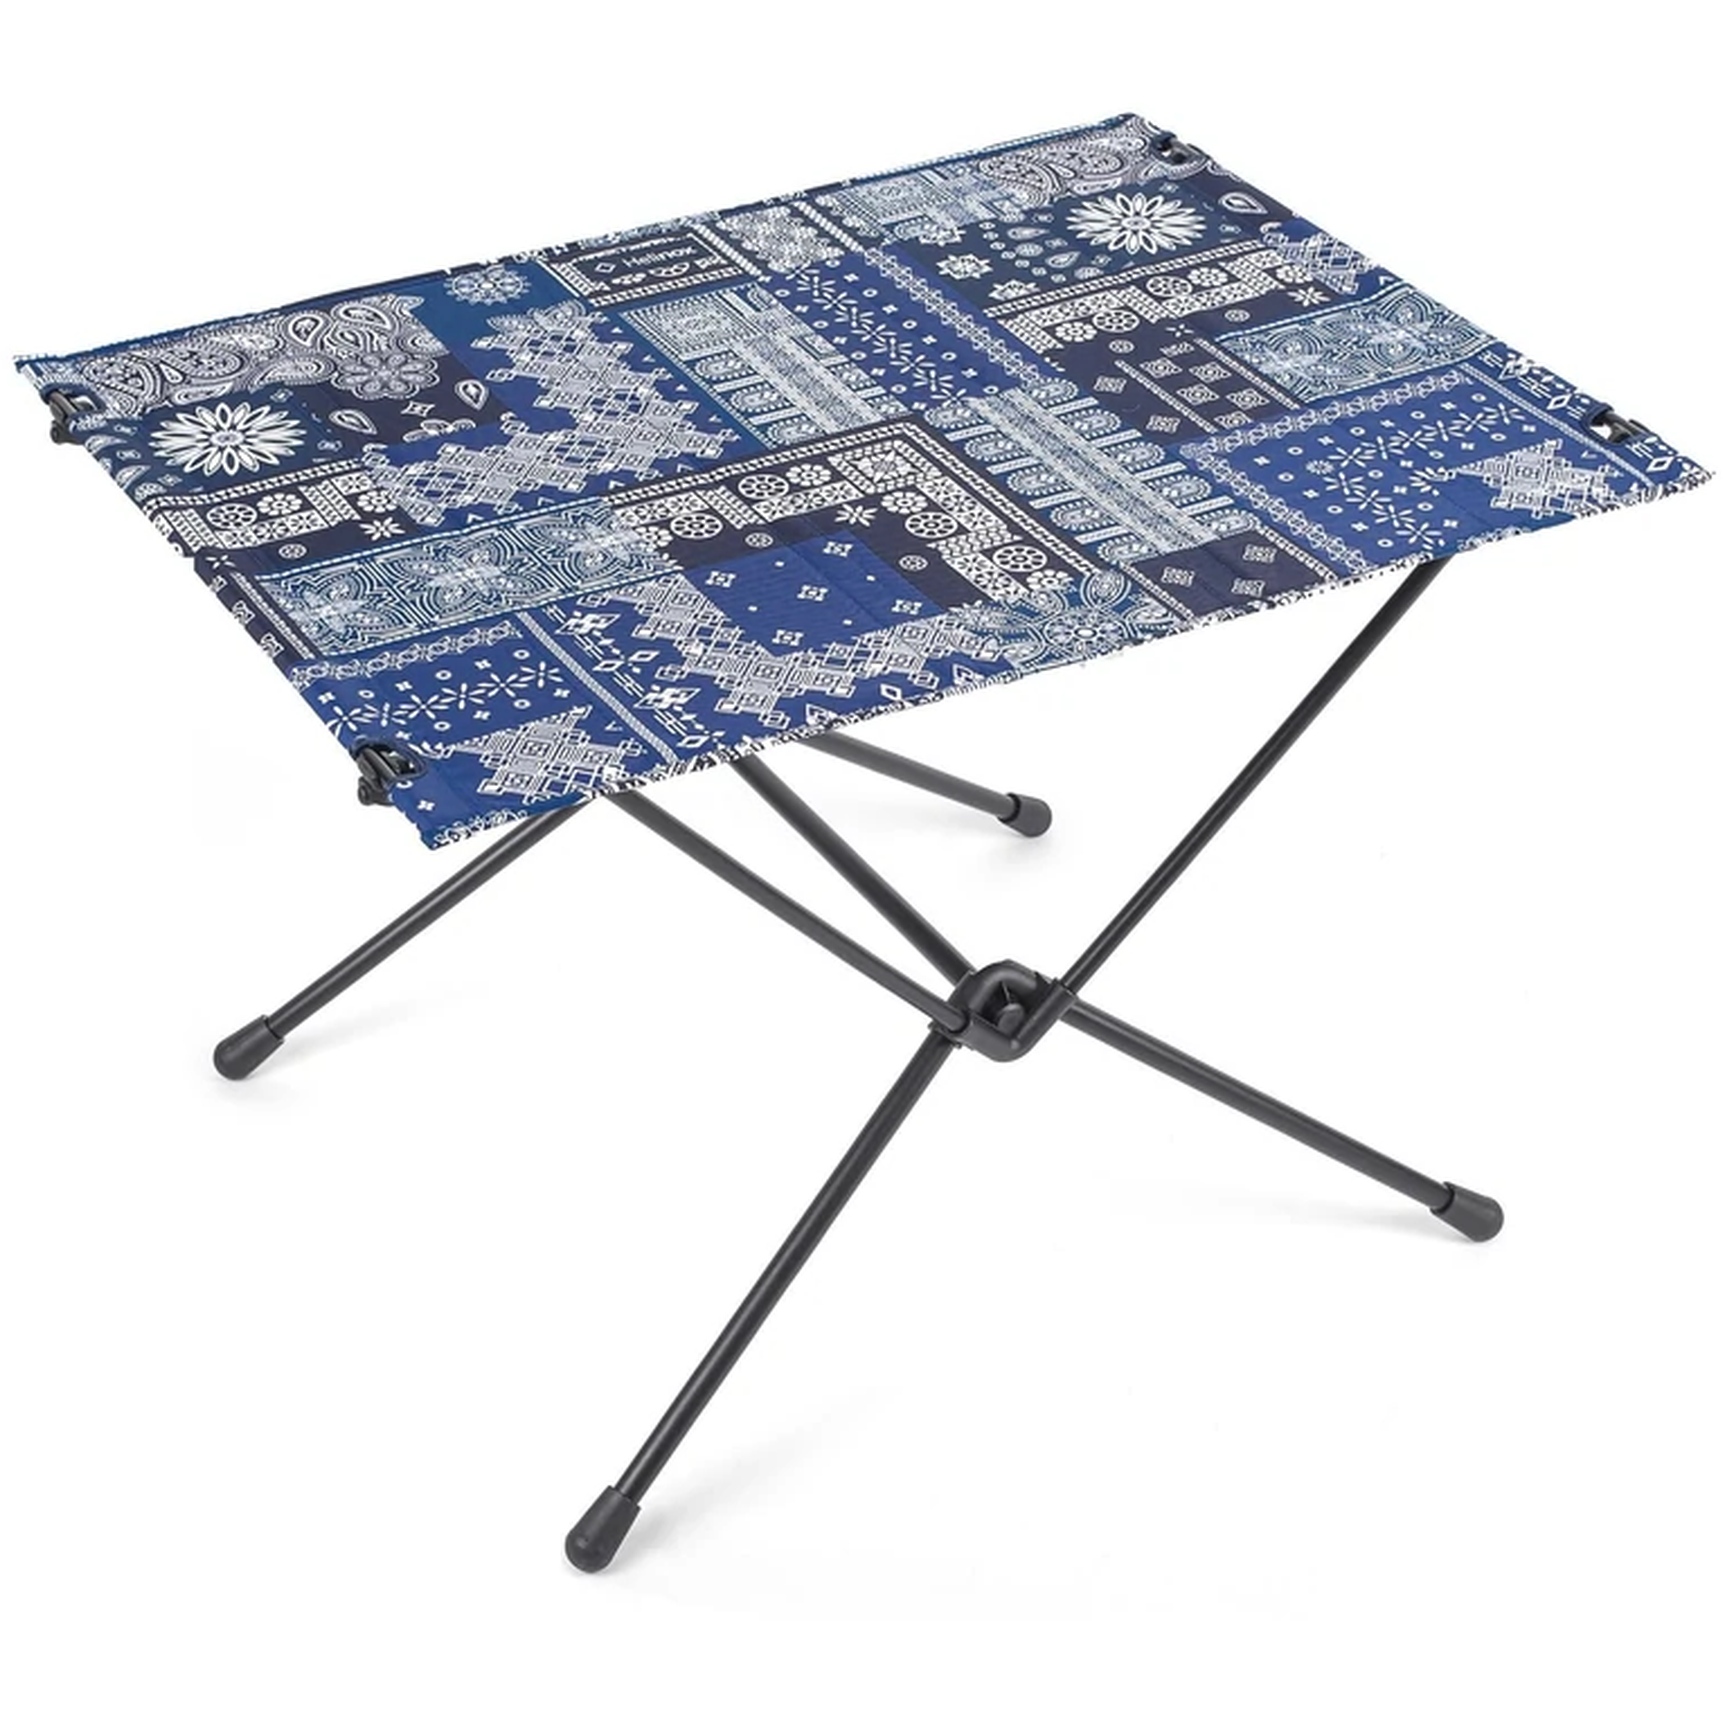 Picture of Helinox Table One Hard Top L - blue bandanna - black